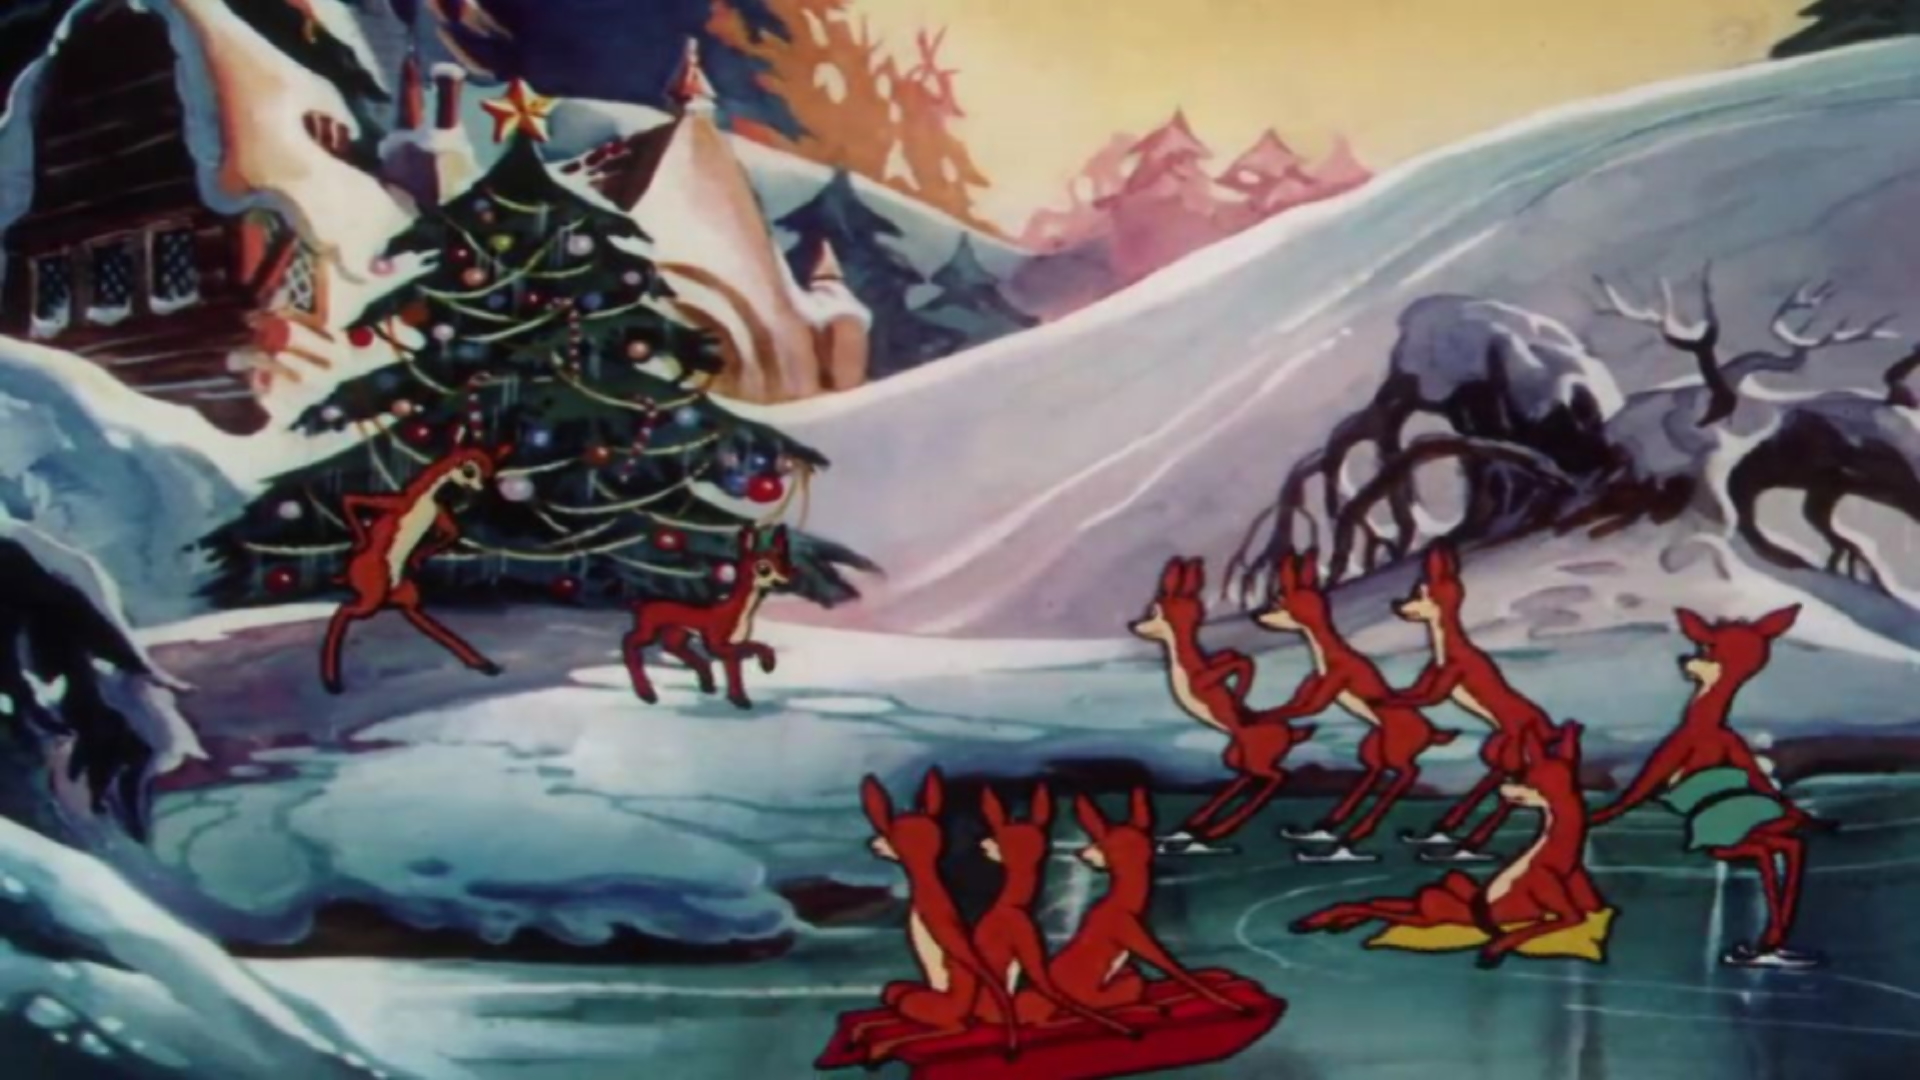 From 1948 Rudolph The Red Nosed Reindeer Cartoon